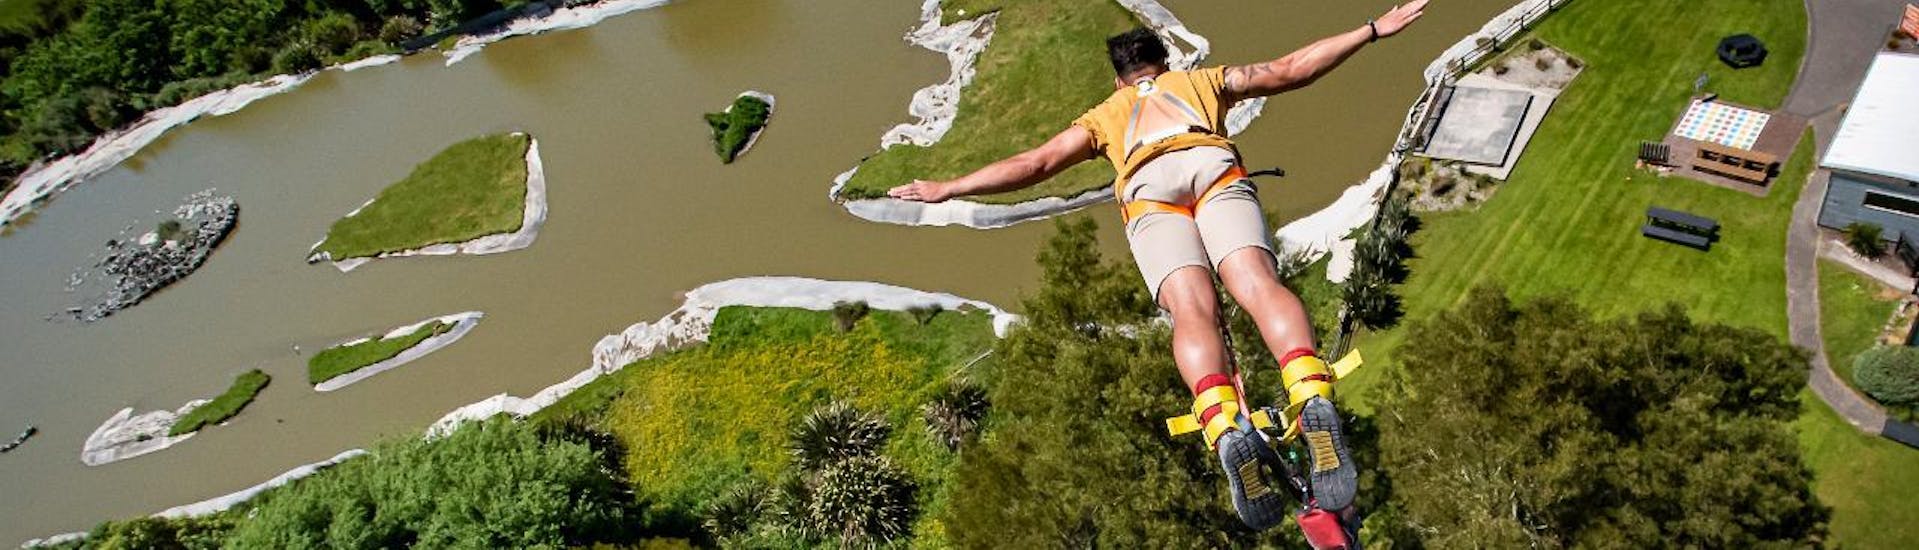 In Velocity Valley Rotorua Adventure Park, a guy took a leap of faith to jump off the 43m high tower and is hurling to the grounds during the Bungy Jump in Rotorua. 